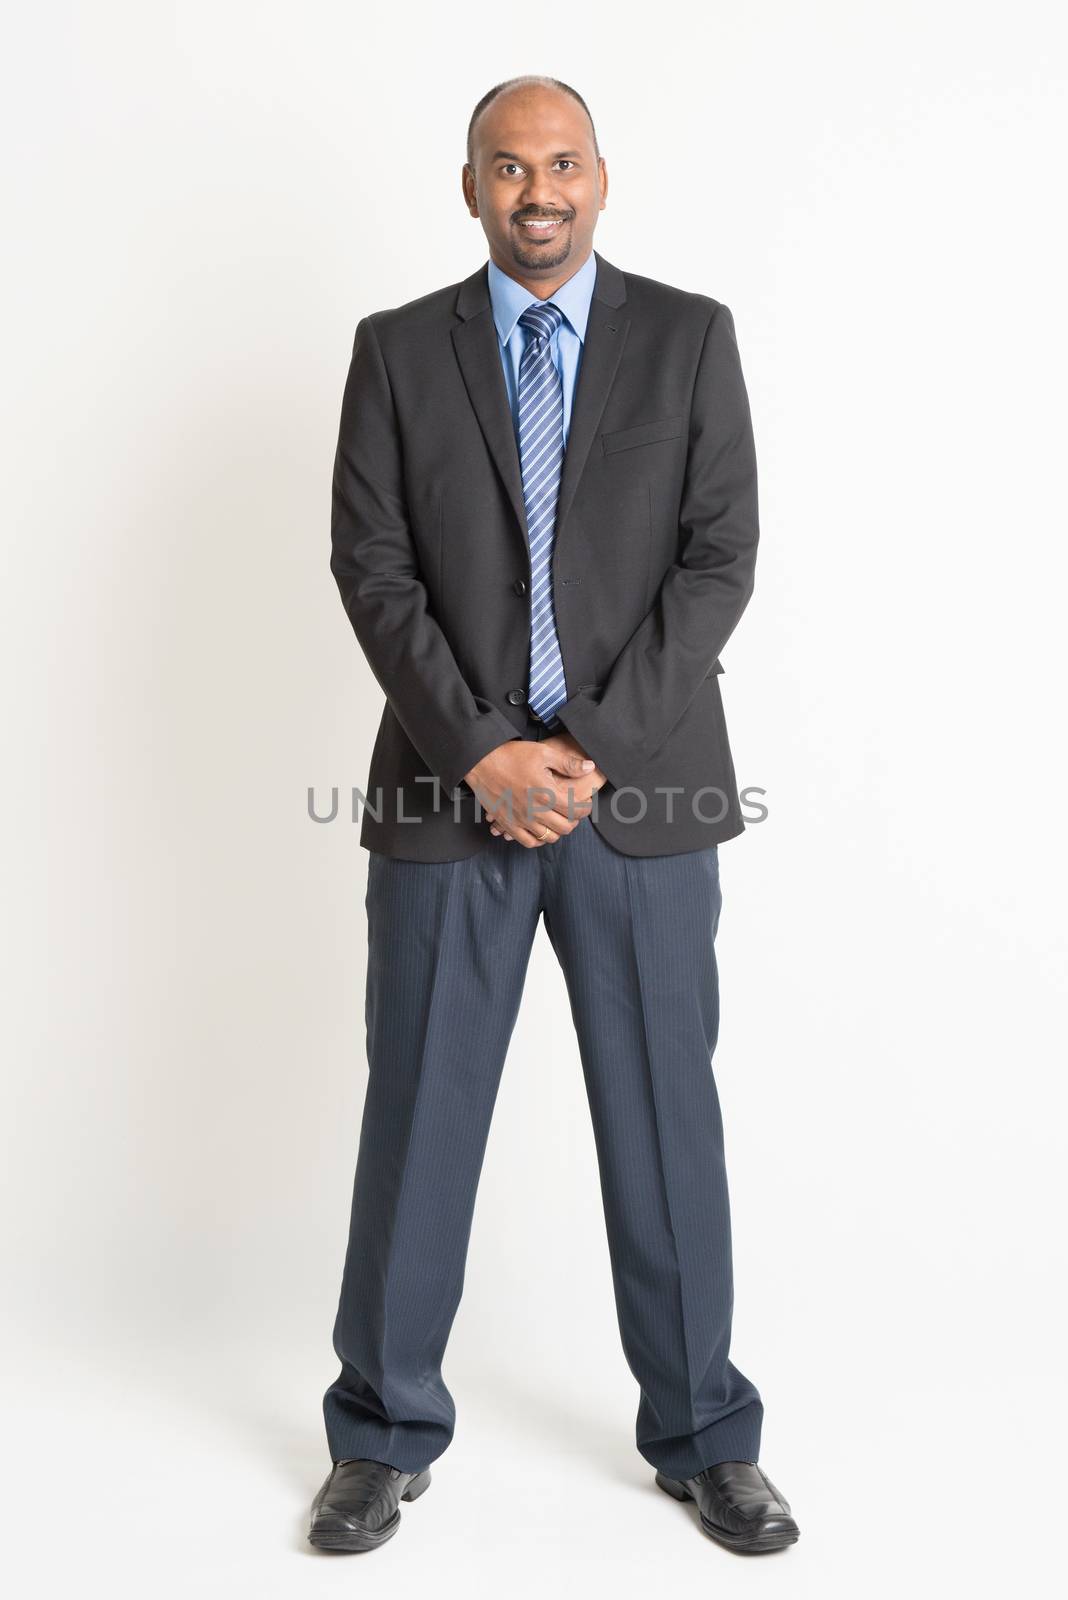 Full length friendly Indian businessman in formal suit looking at camera, standing on plain background.